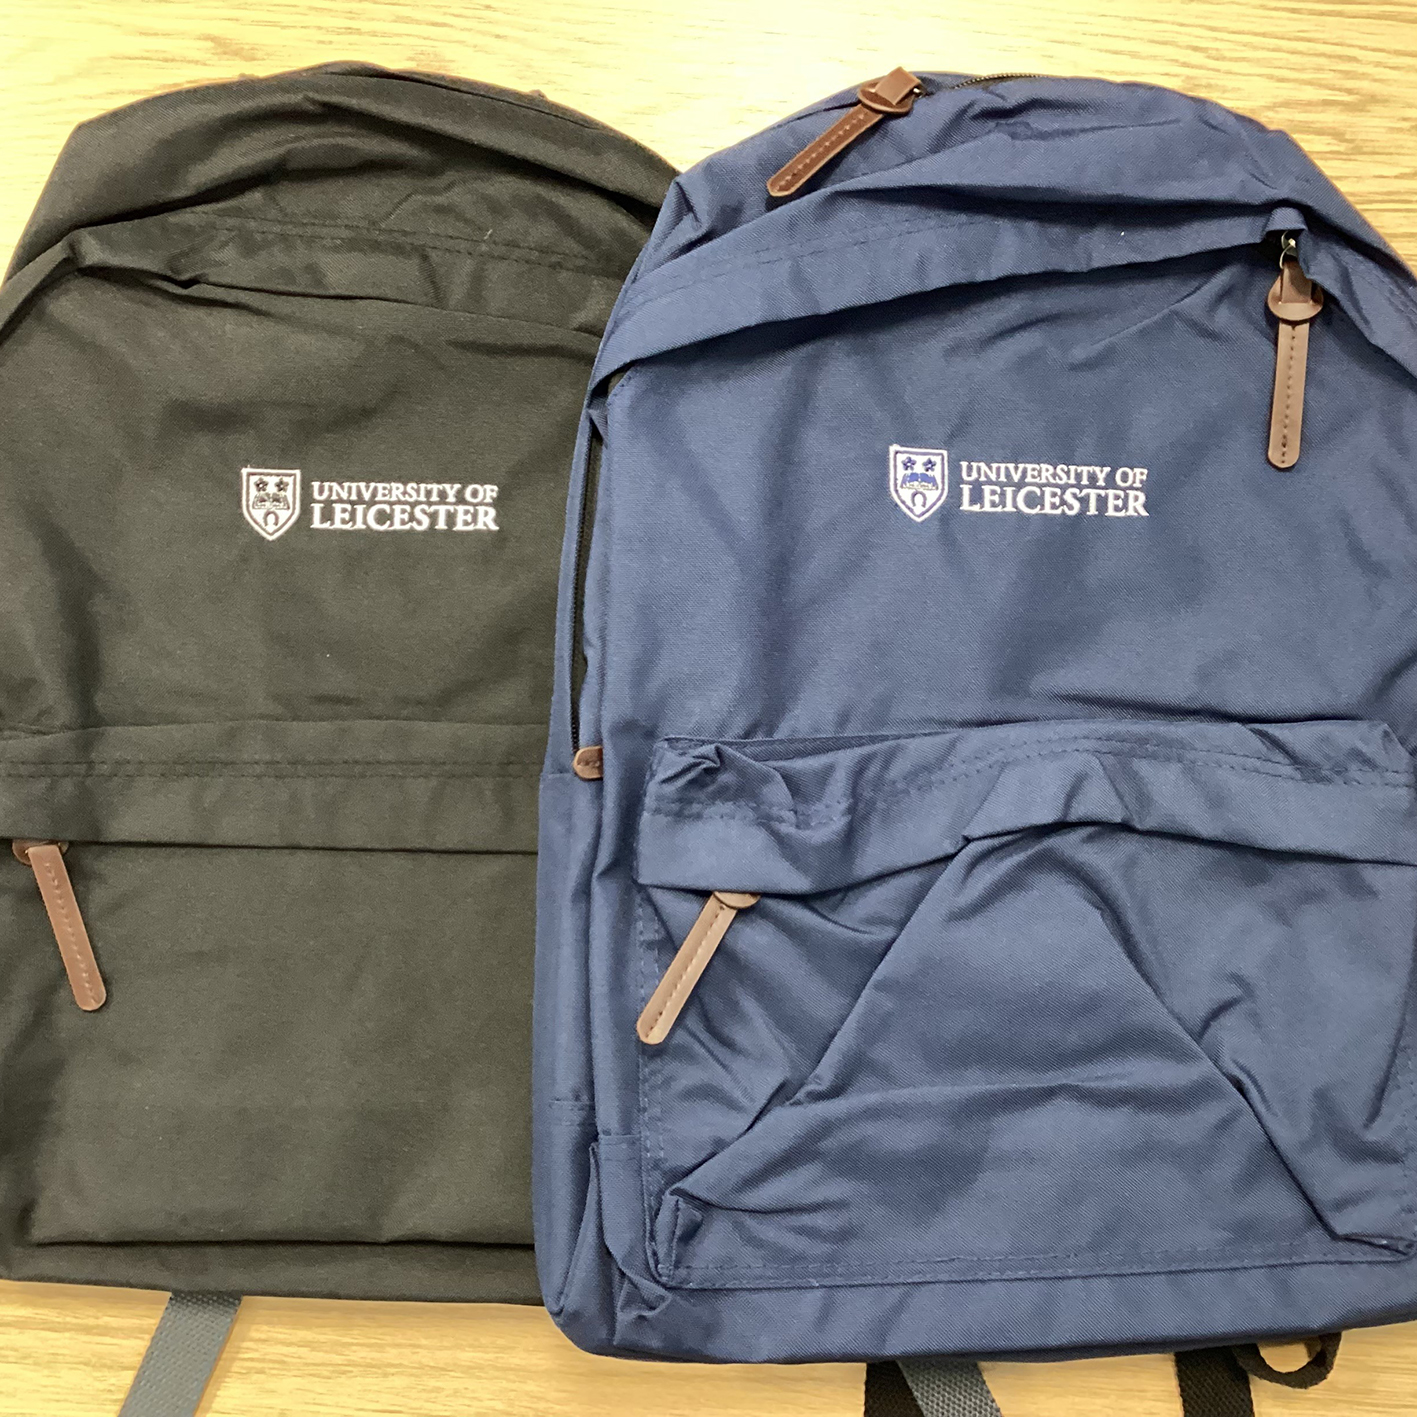 University of Leicester Backpack